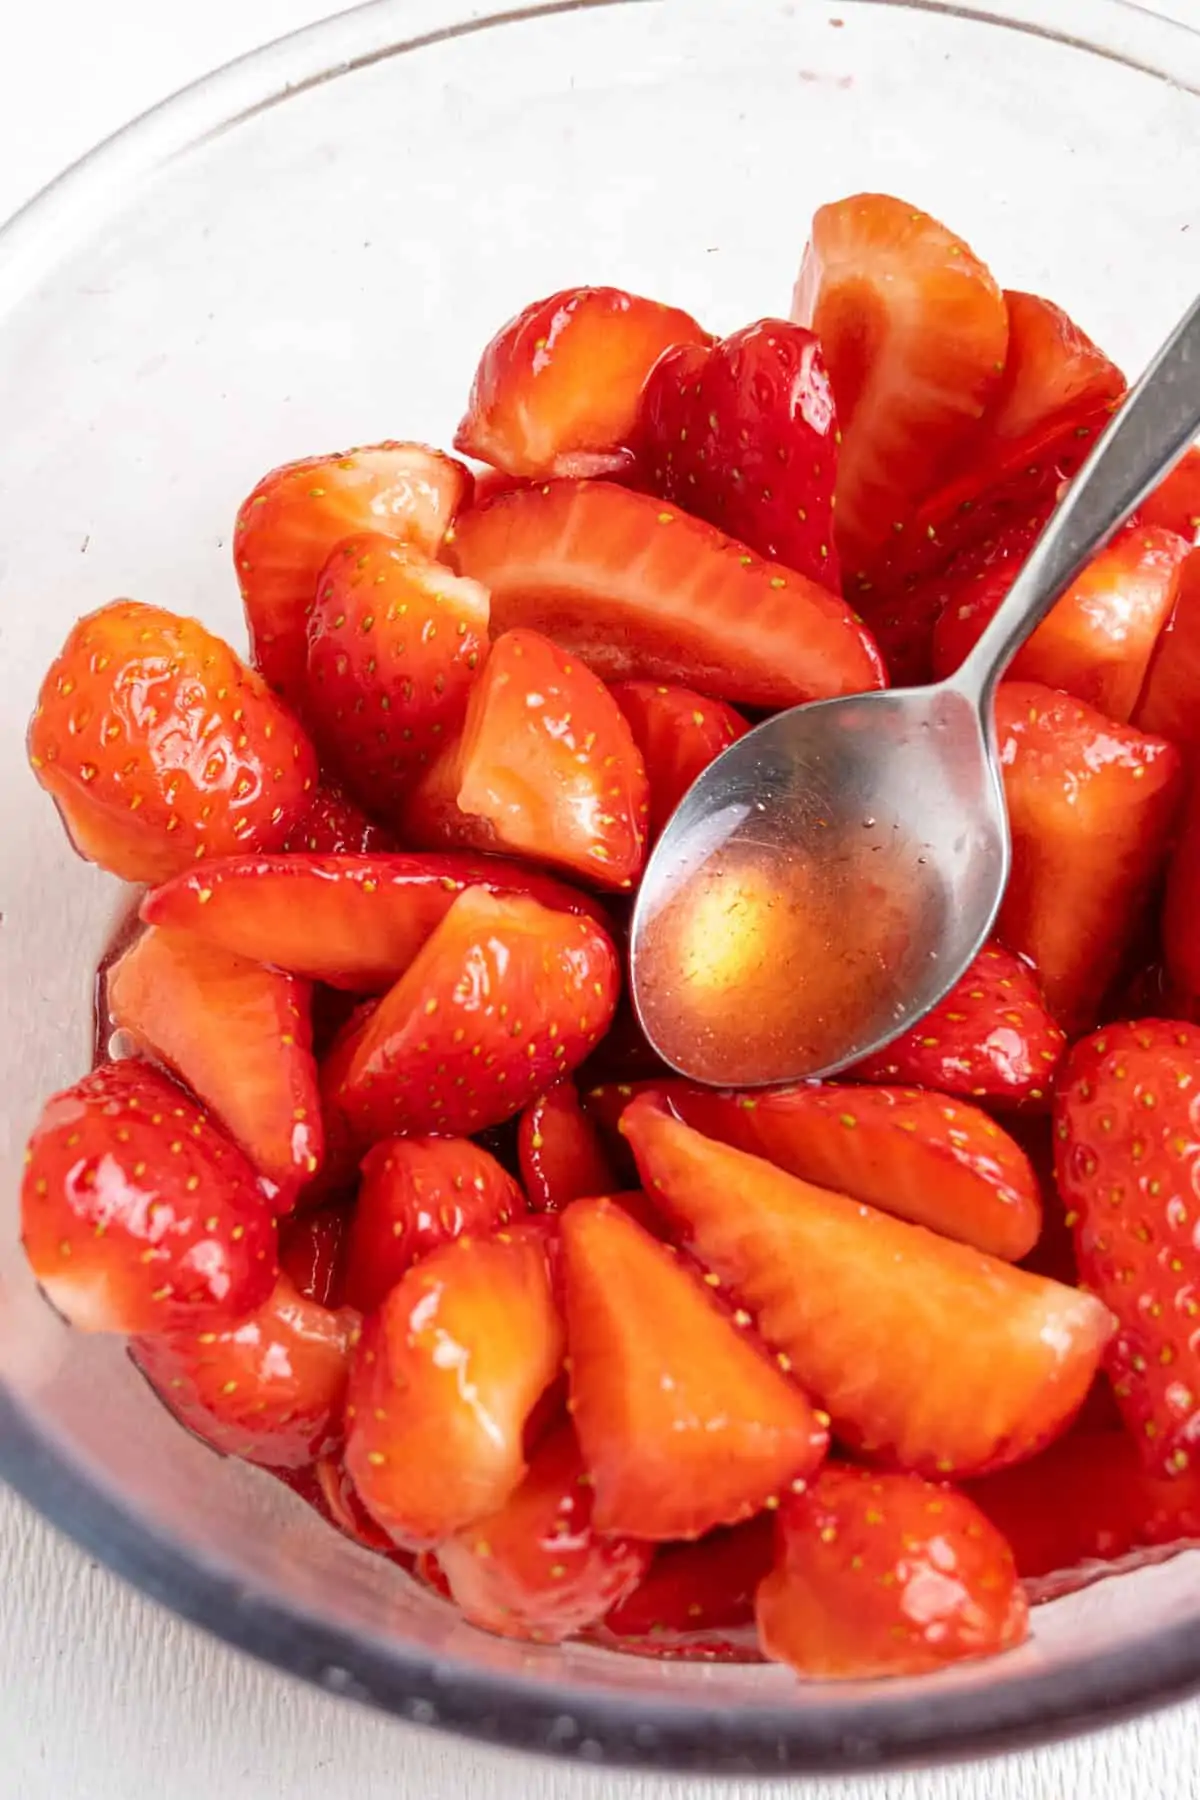 Strawberries in a bowl after being macerated to become soft and juicy.